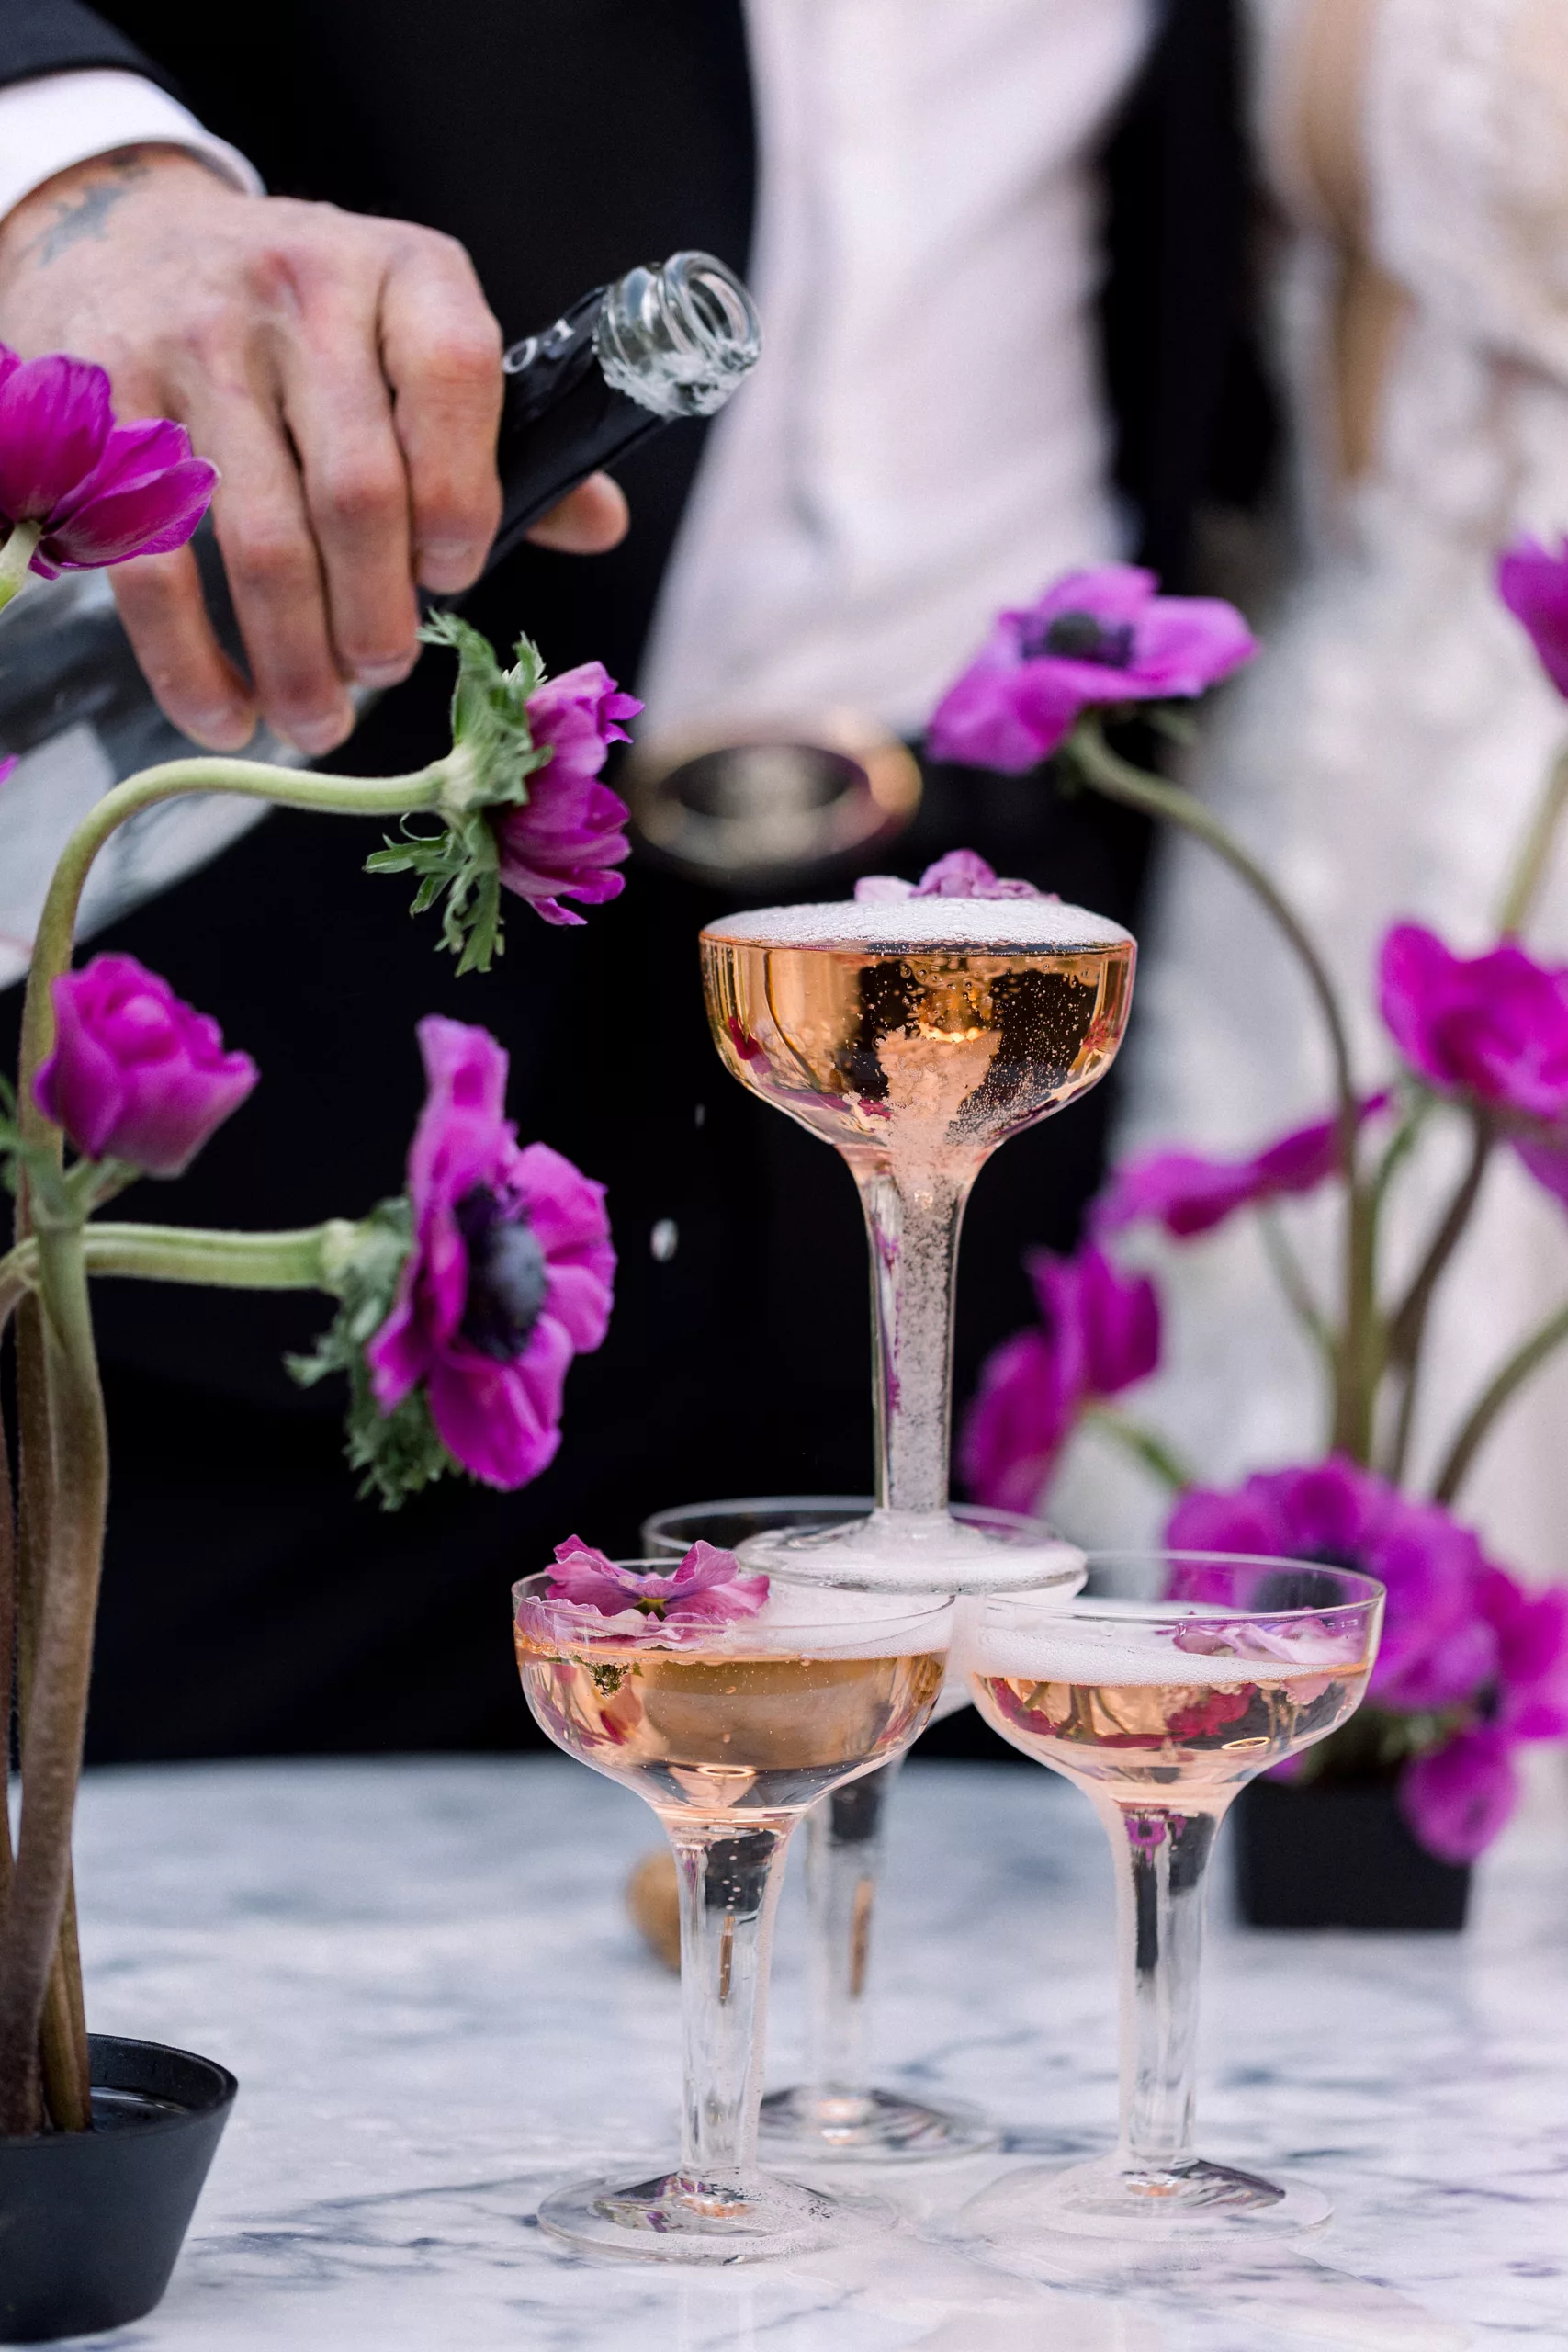 Details of a groom pouring champagne around purple flowers